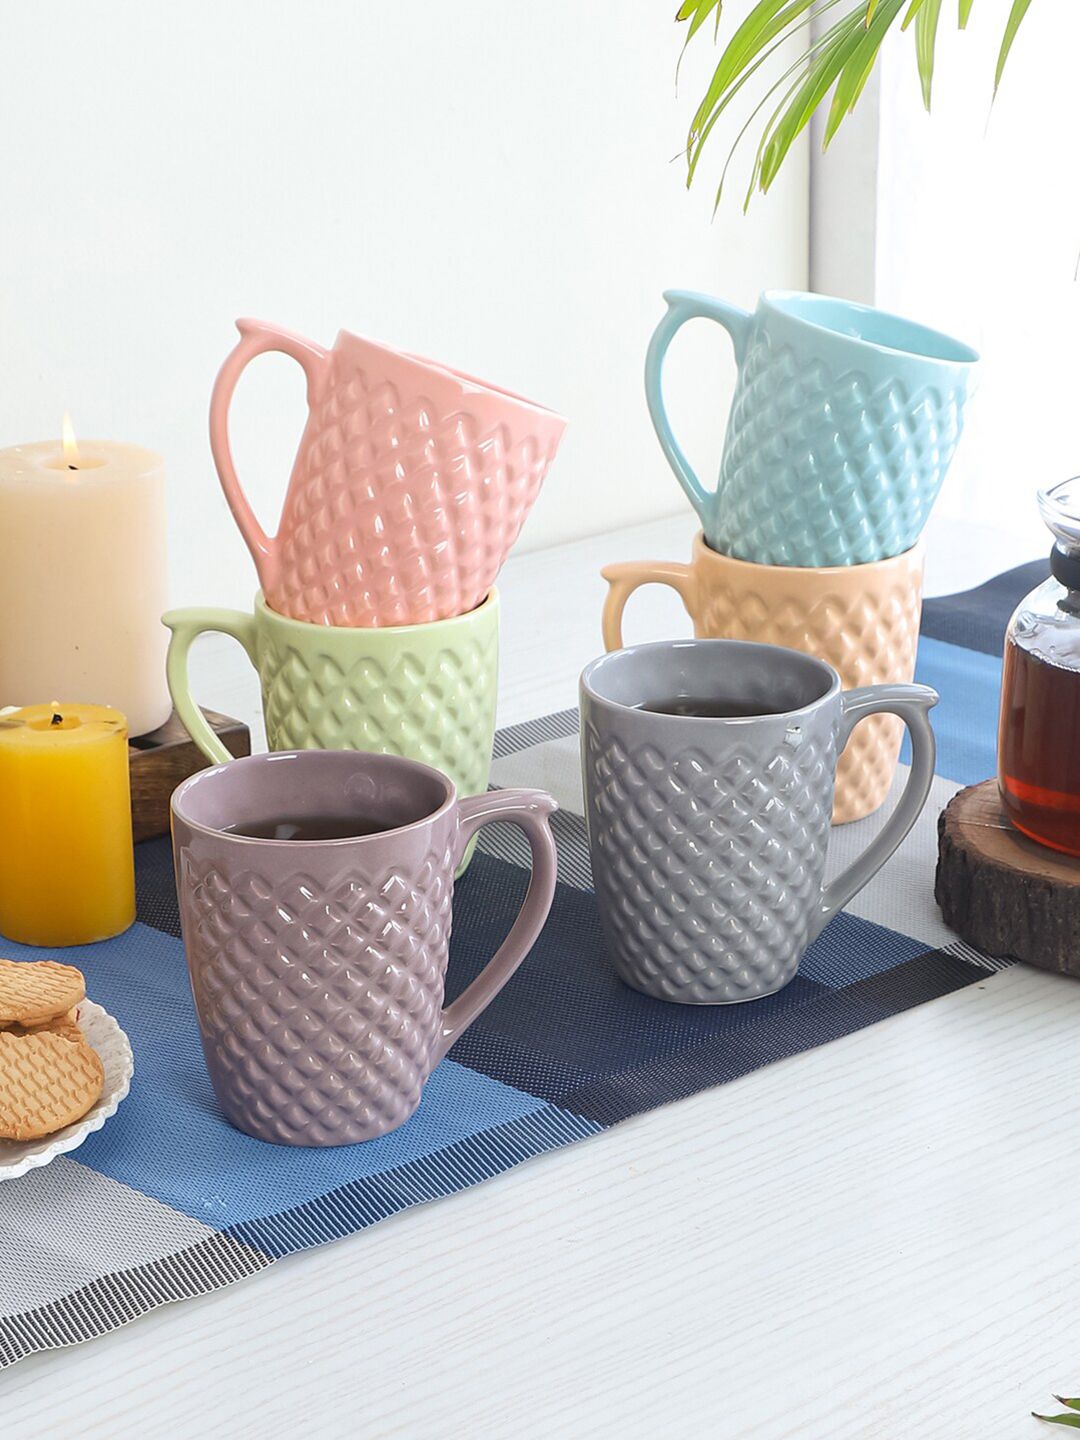 CDI Multicoloured Textured Ceramic Glossy Cups Set of 6 Mugs Price in India